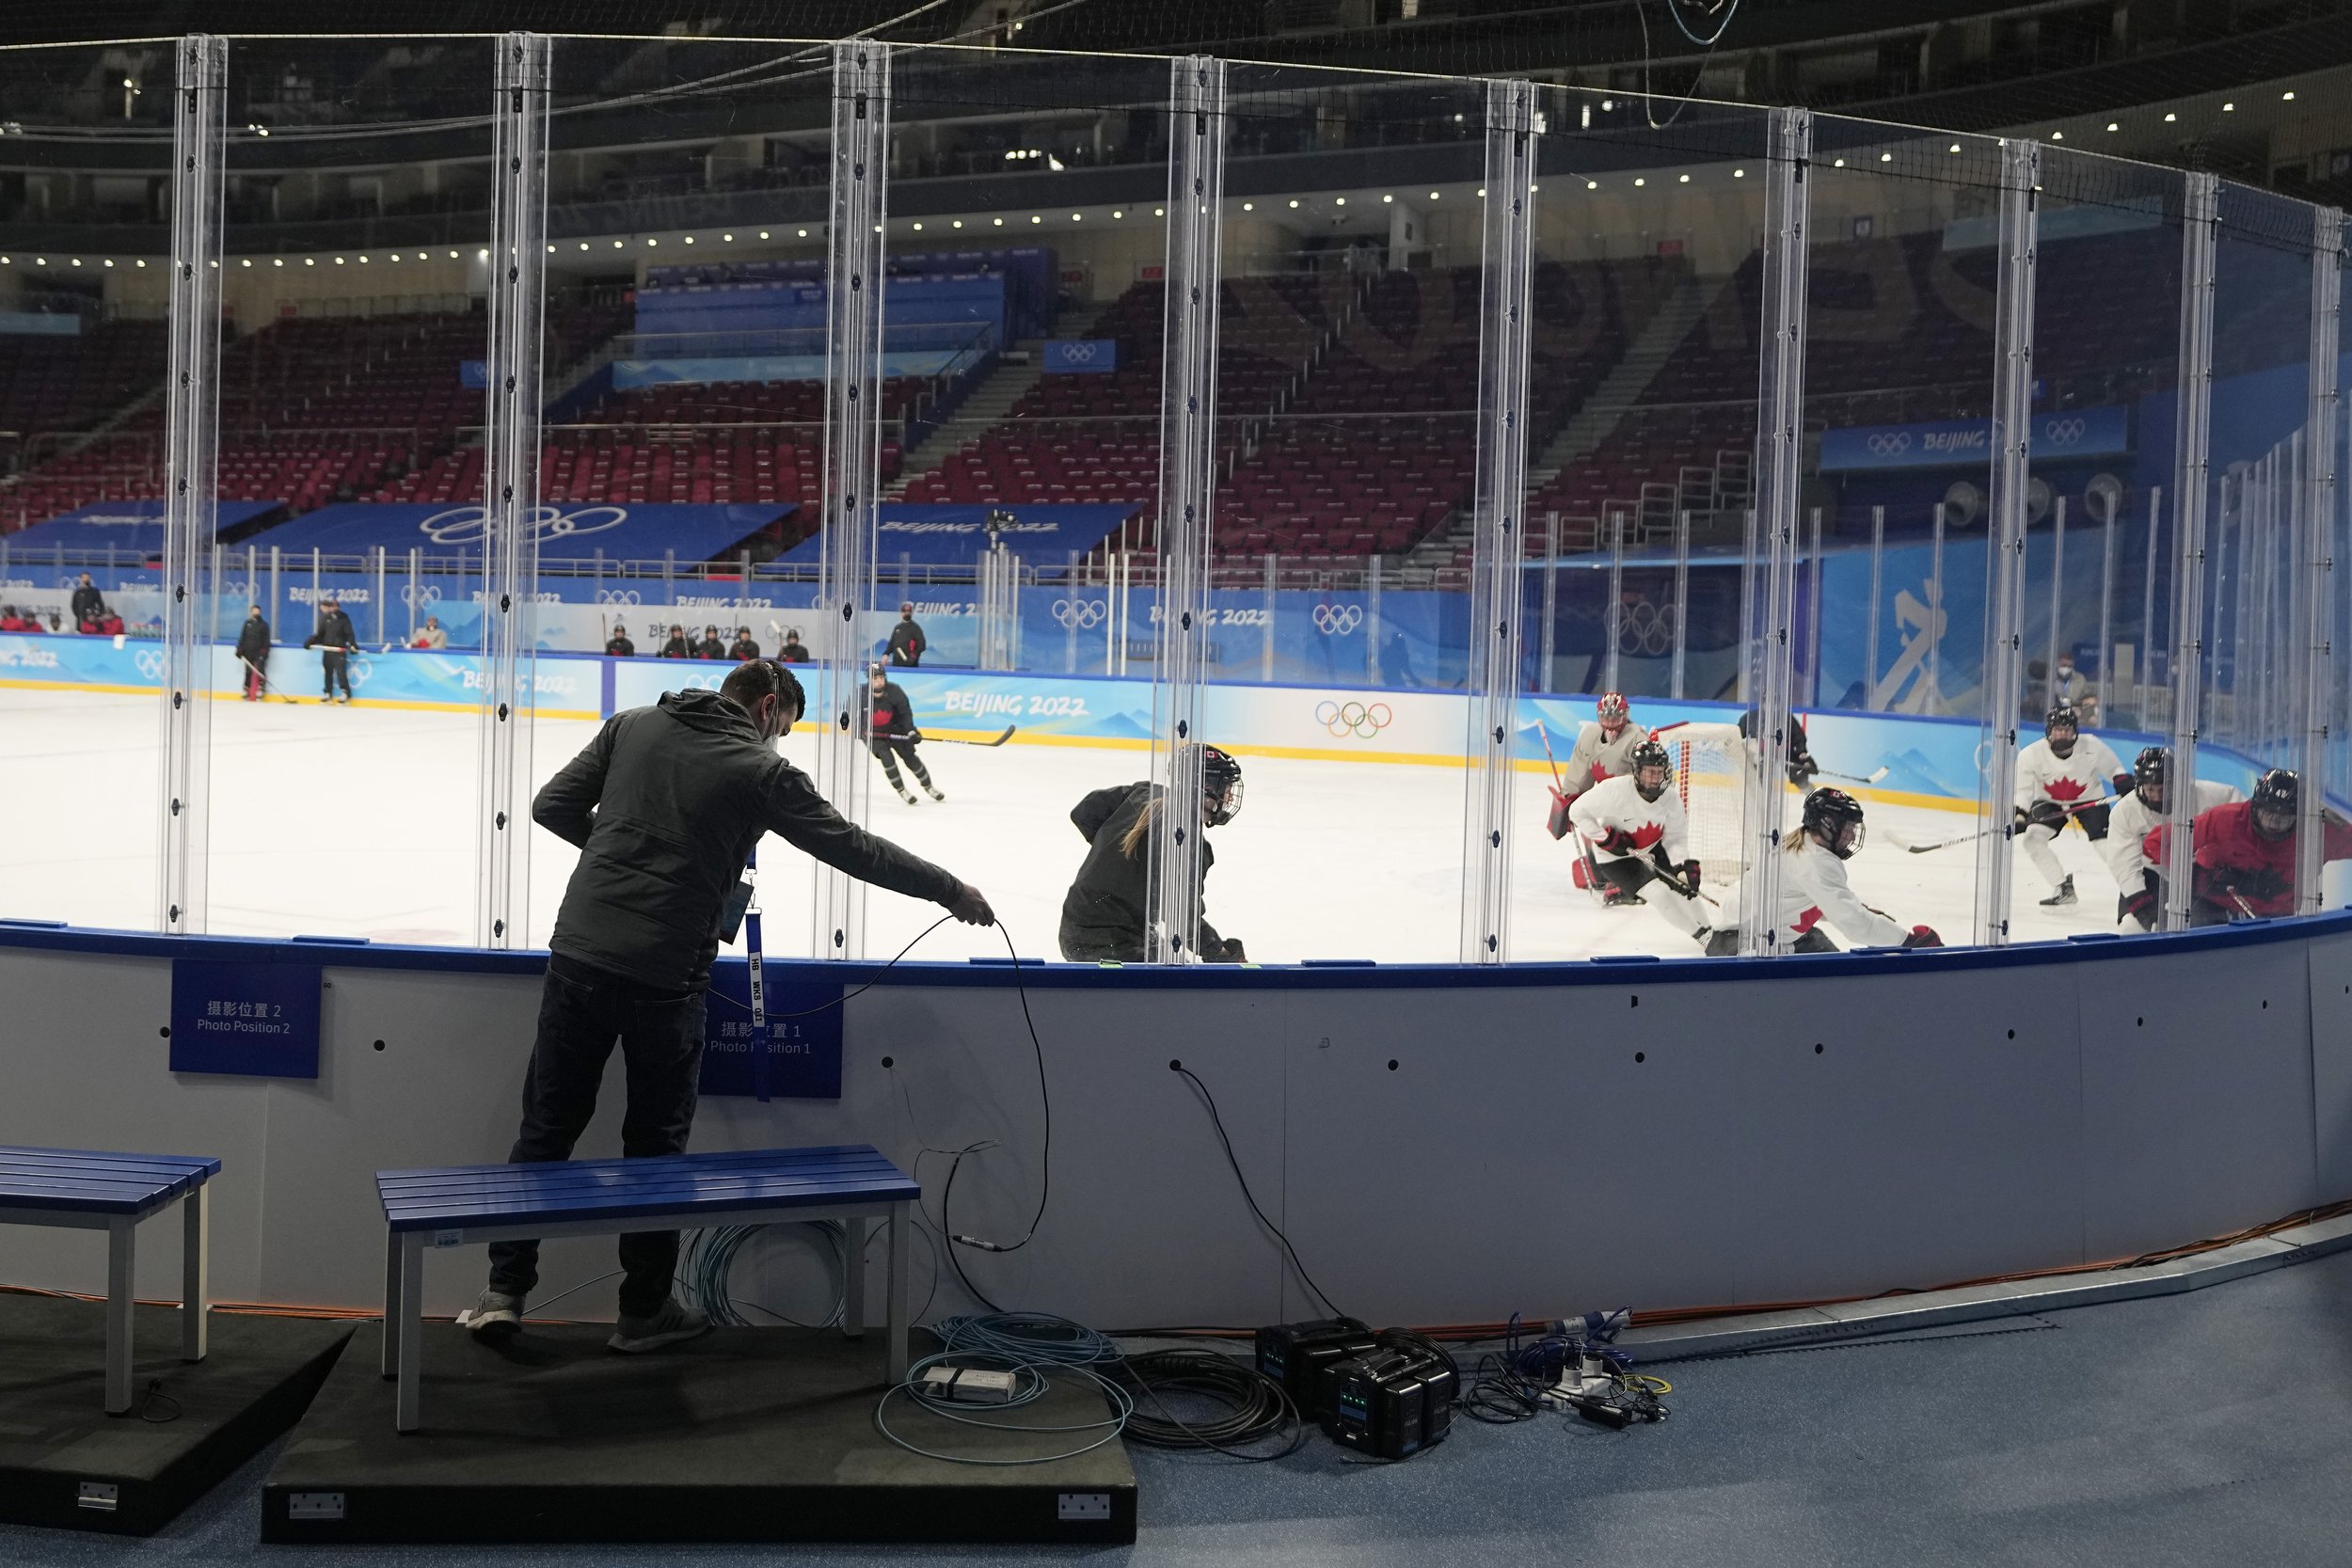  A member of the broadcast crew installs cable as Canada's women's hockey team practice on the ice at the 2022 Winter Olympics, Jan. 30, 2022, in Beijing. (AP Photo/Jeff Roberson) 